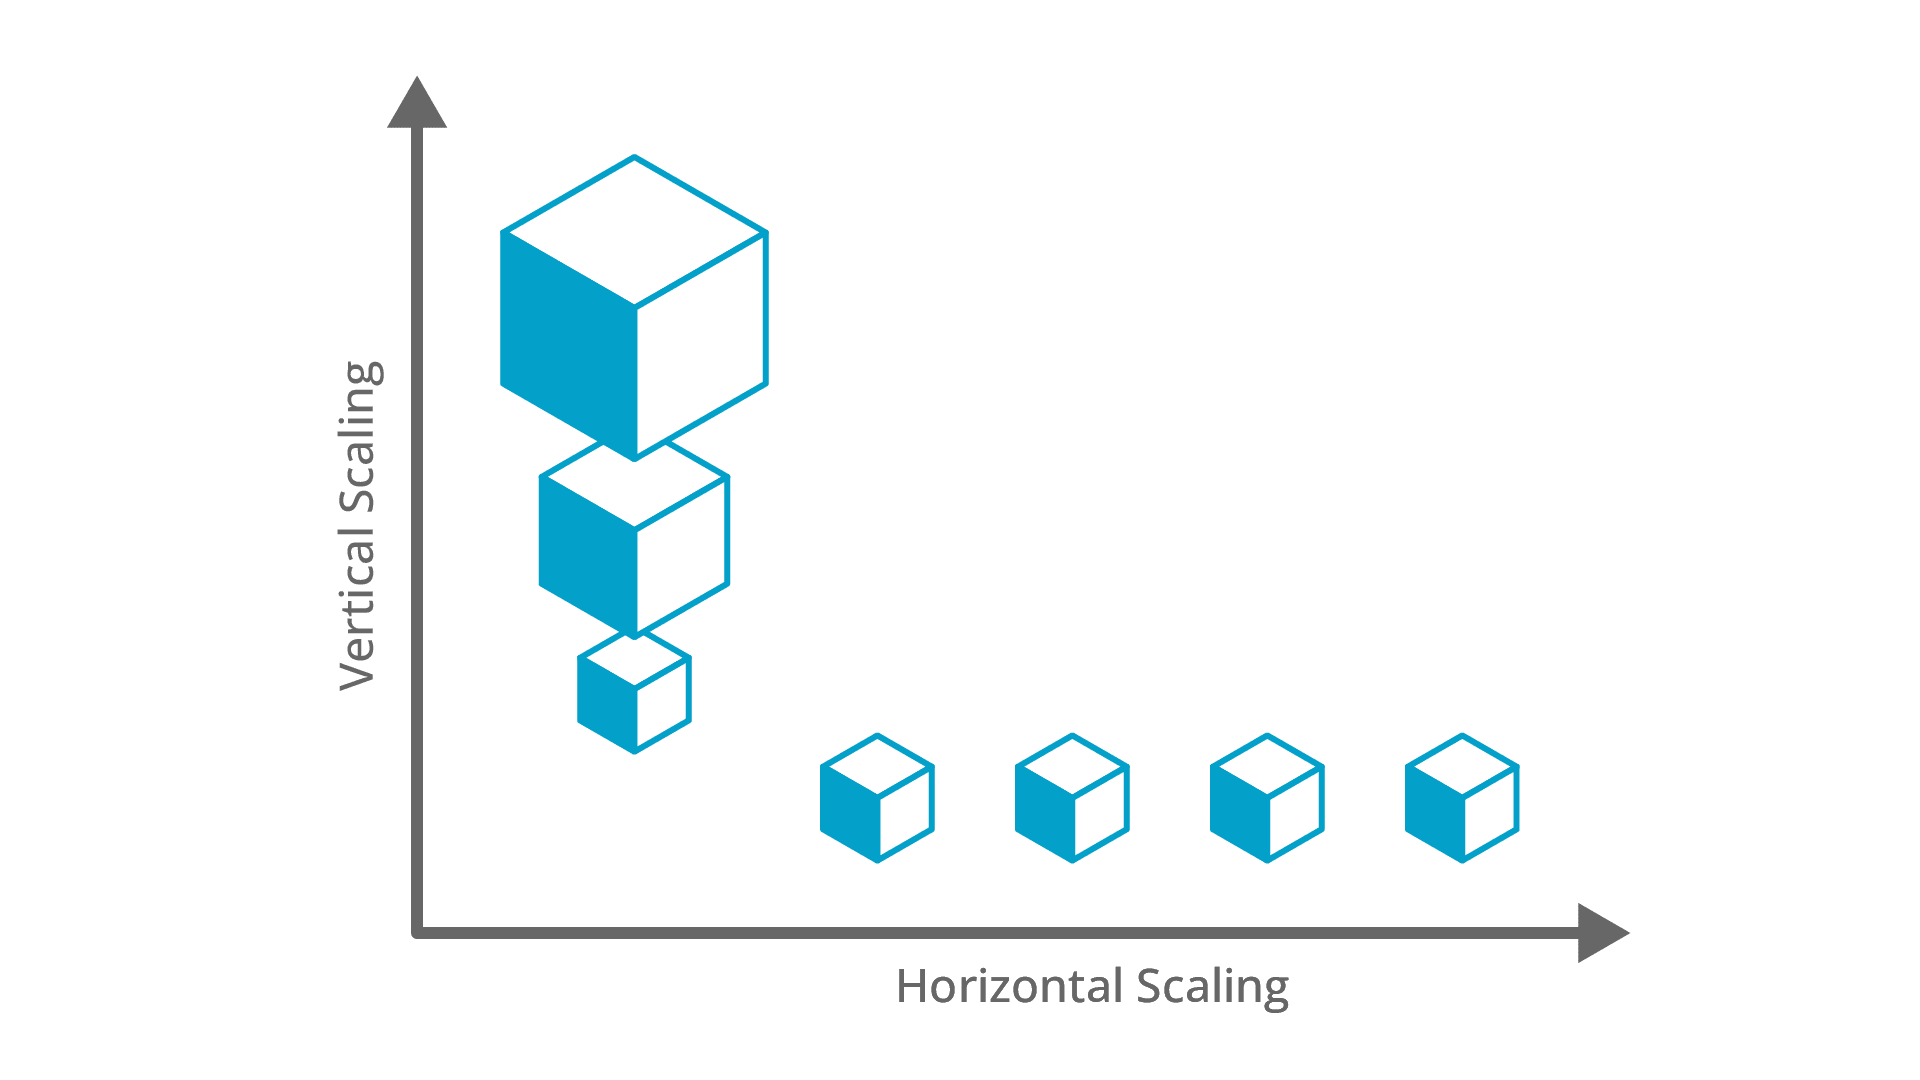 Dedicated private clouds offer vertical and horizontal scaling options.